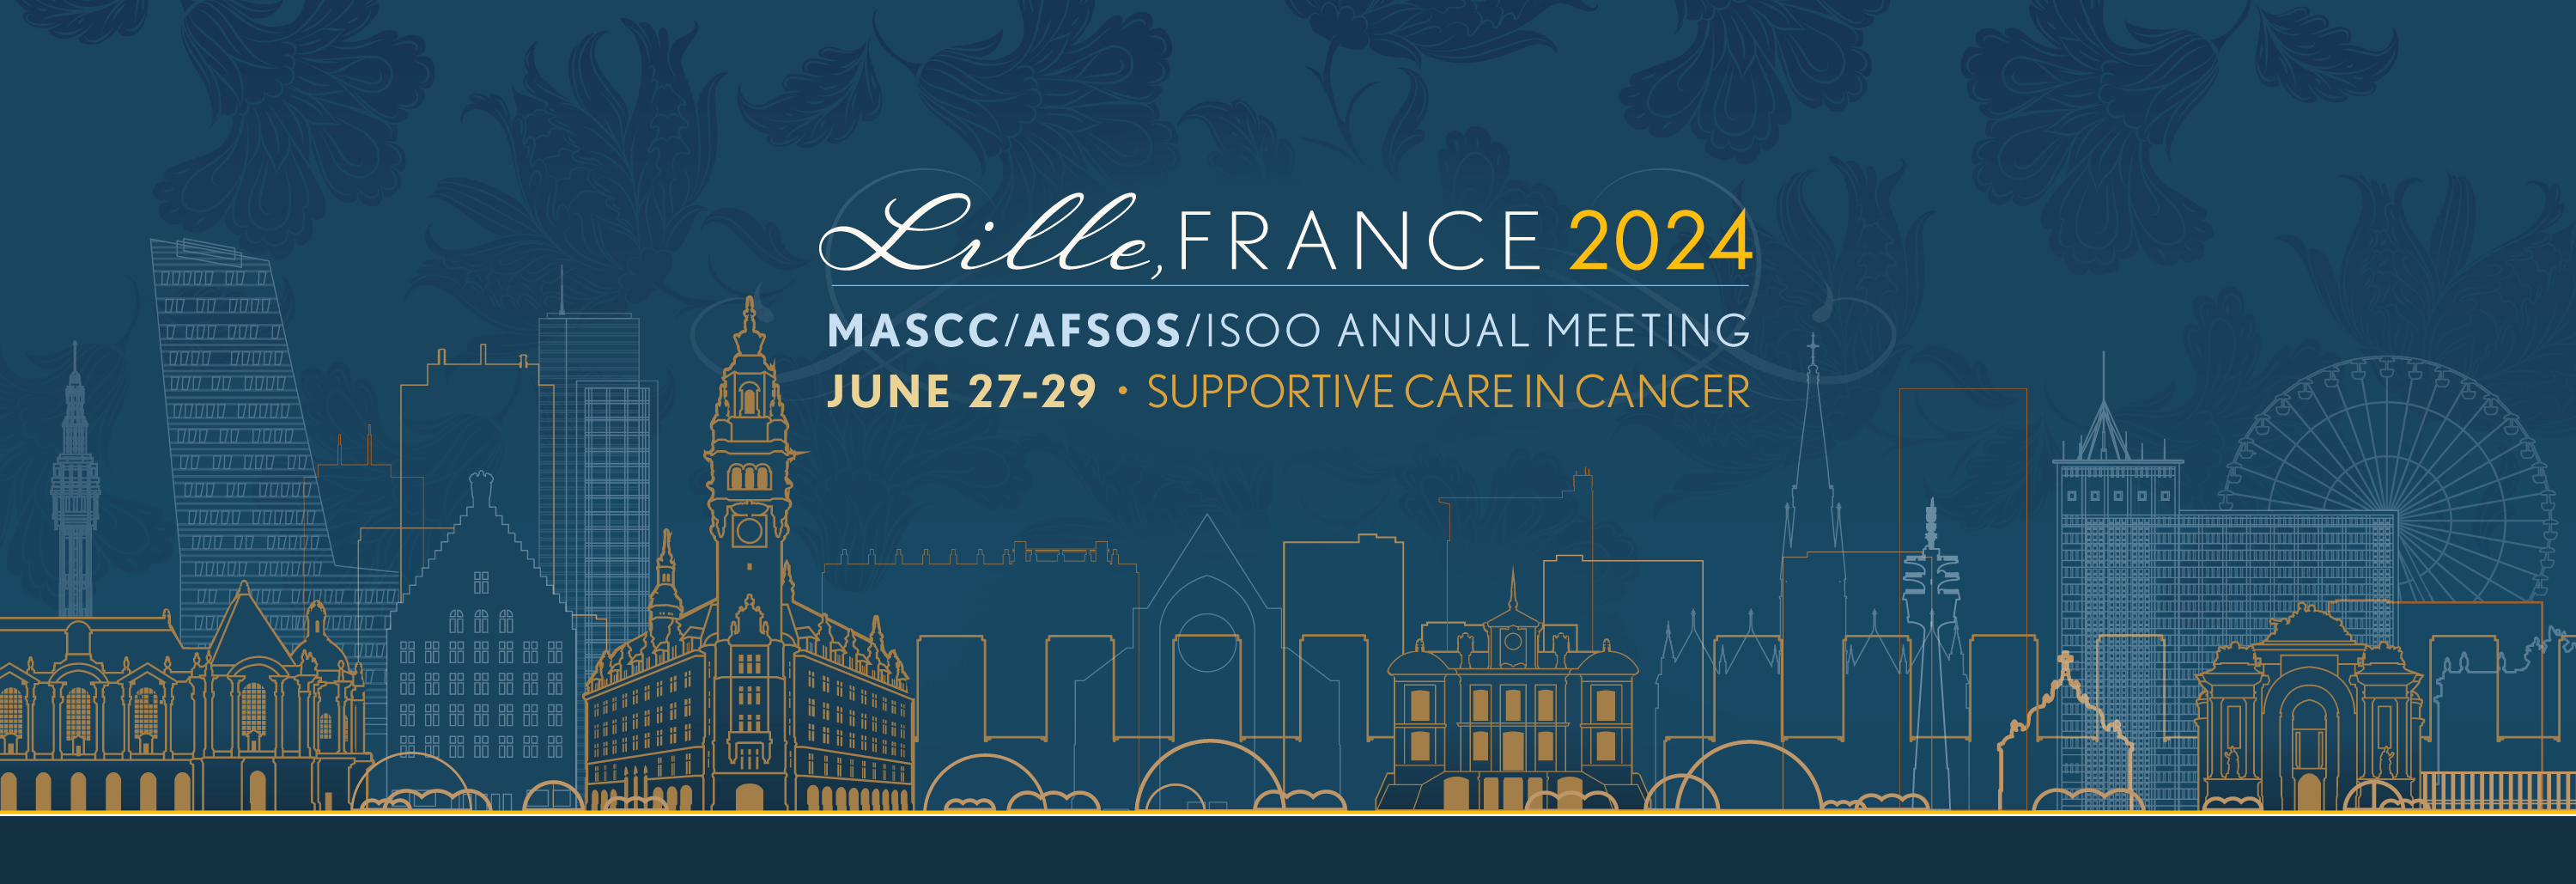 MASCC & ISOO Annual Meeting - Lille, France 2024